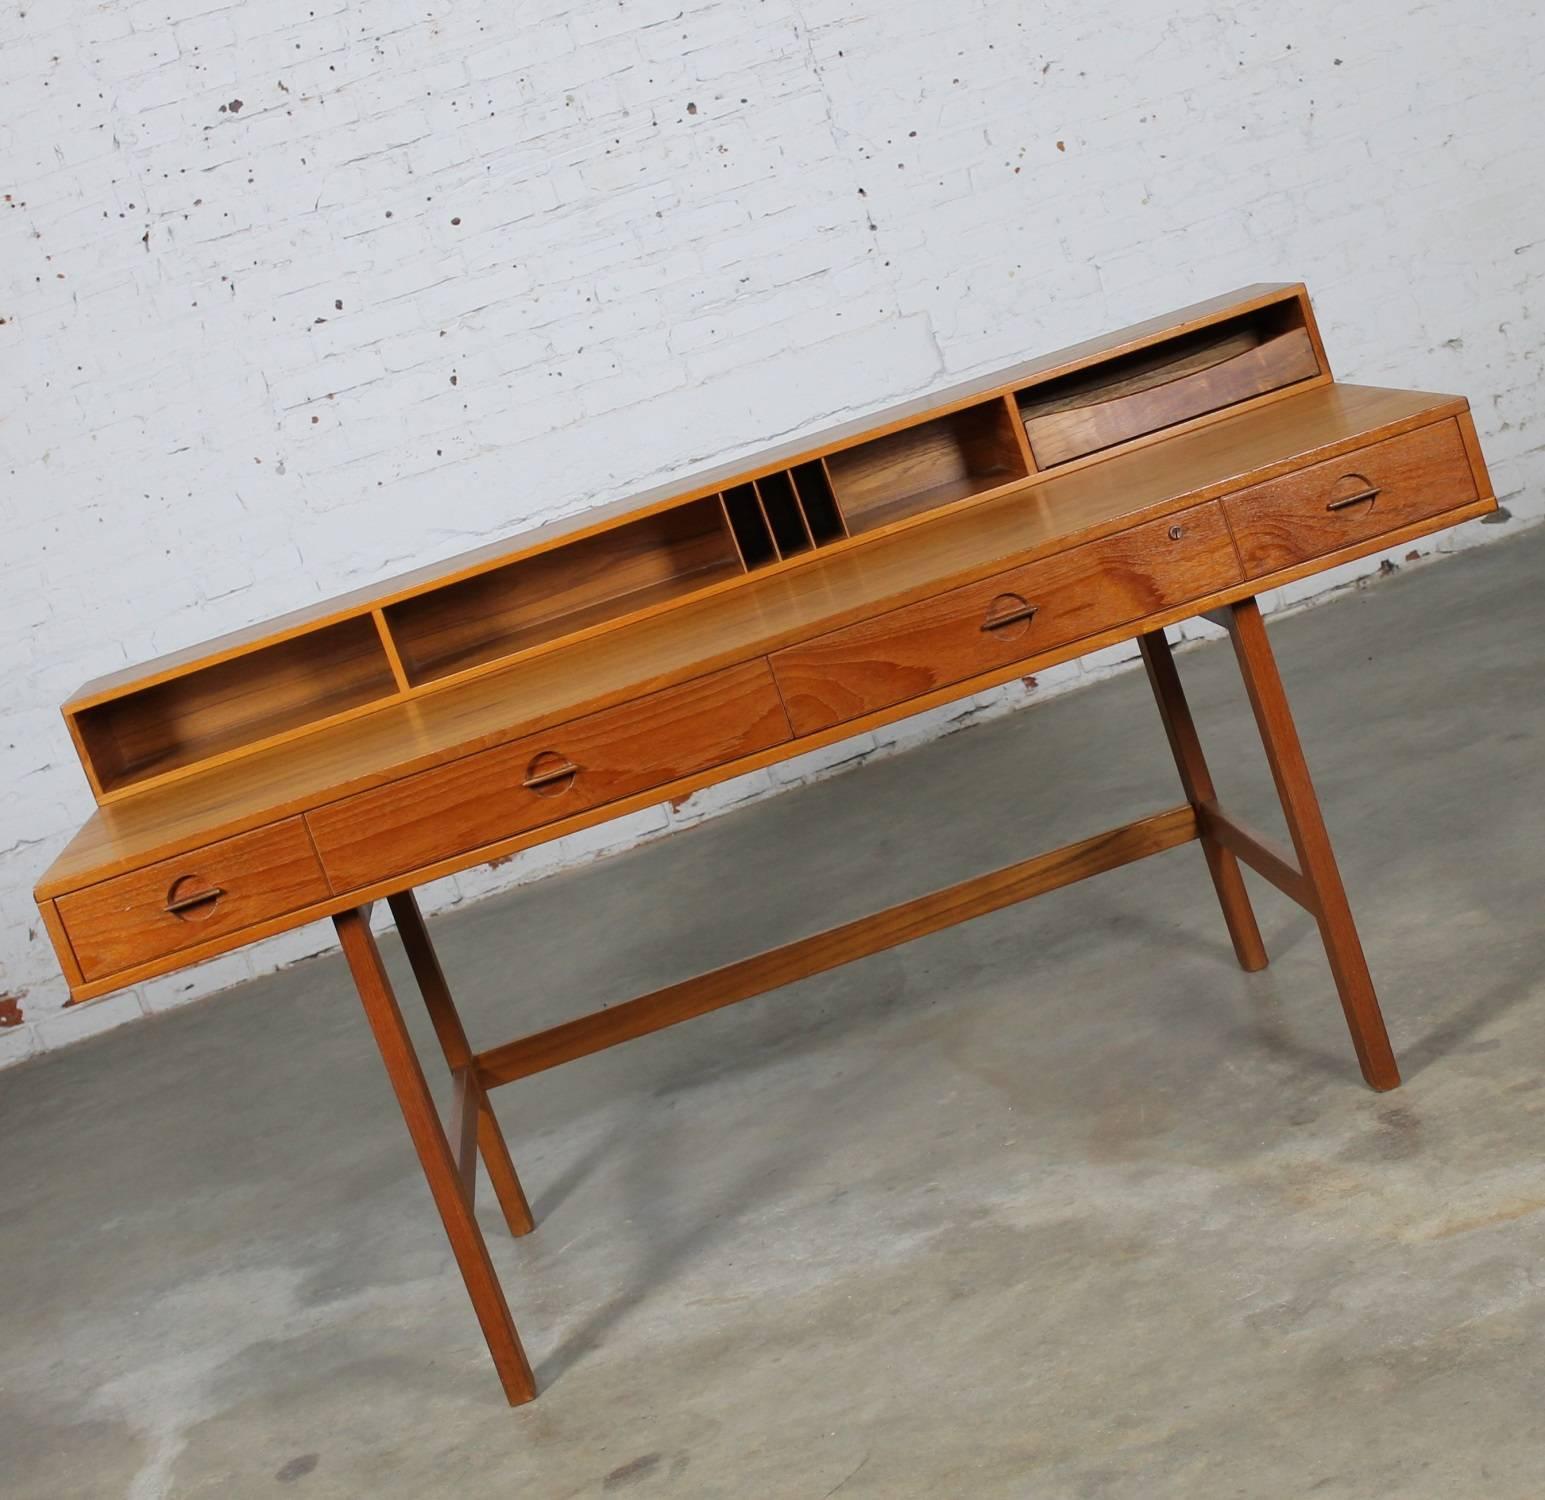 Incredible Mid-Century Danish modern teak flip-top partner’s desk attributed to Peter Løvig Nielsen and produced by Hedensted Mobelfabrik. This desk is sometimes attributed to Jens Quistgaard for Løvig. It is in wonderful vintage condition and